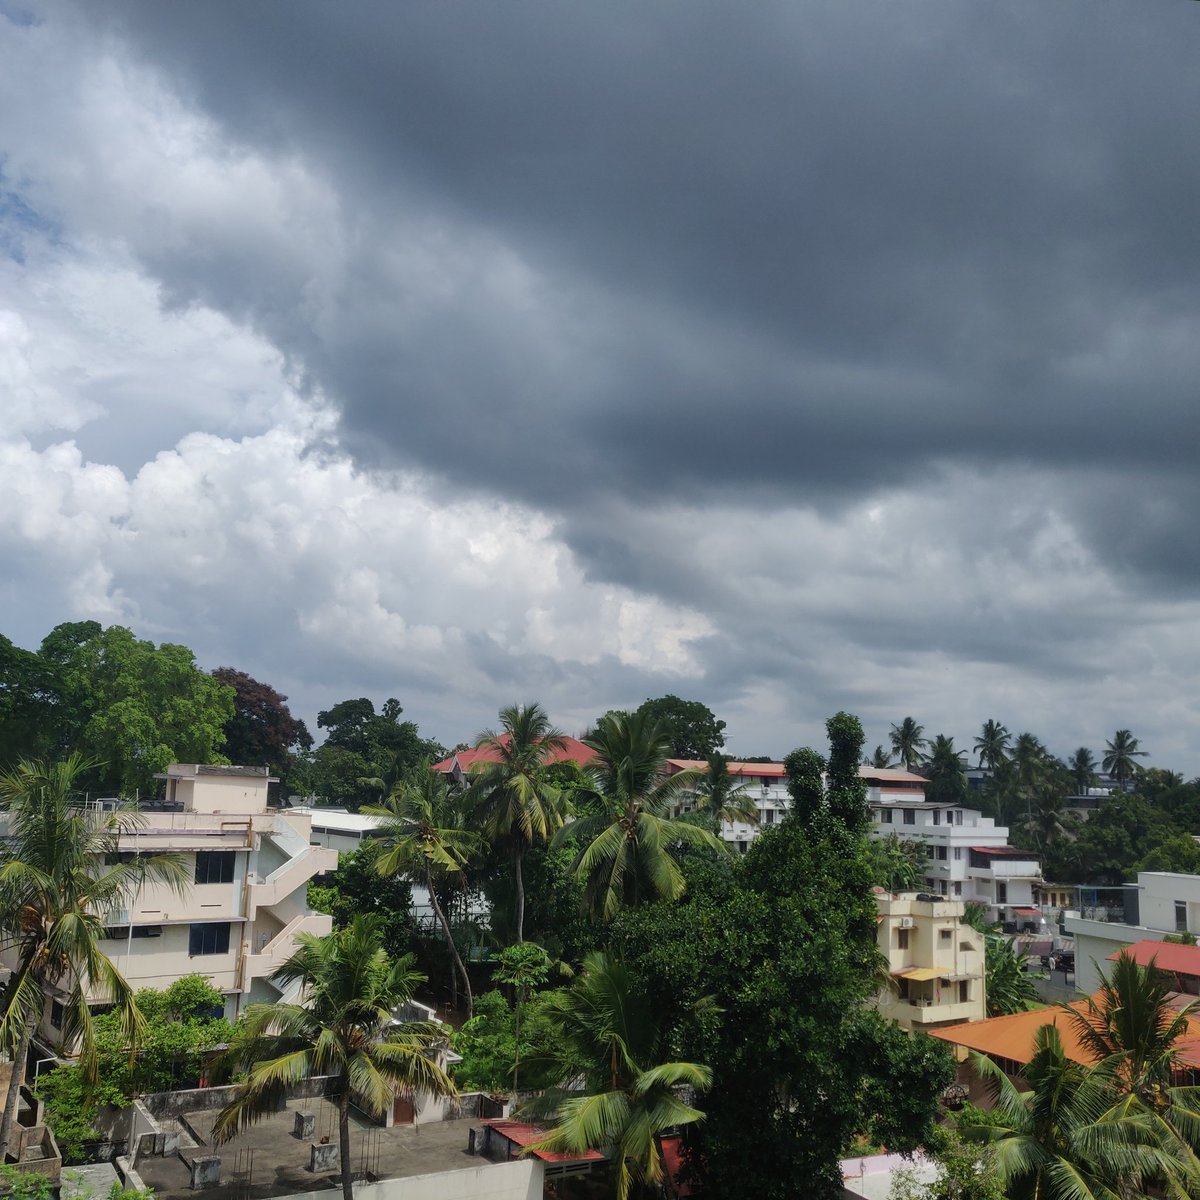 Dark sweeping clouds over the West in Trivandrum.

Just 5-7 days for SWM onset.

#SouthwestMonsoon #Kerala #IndianMonsoon